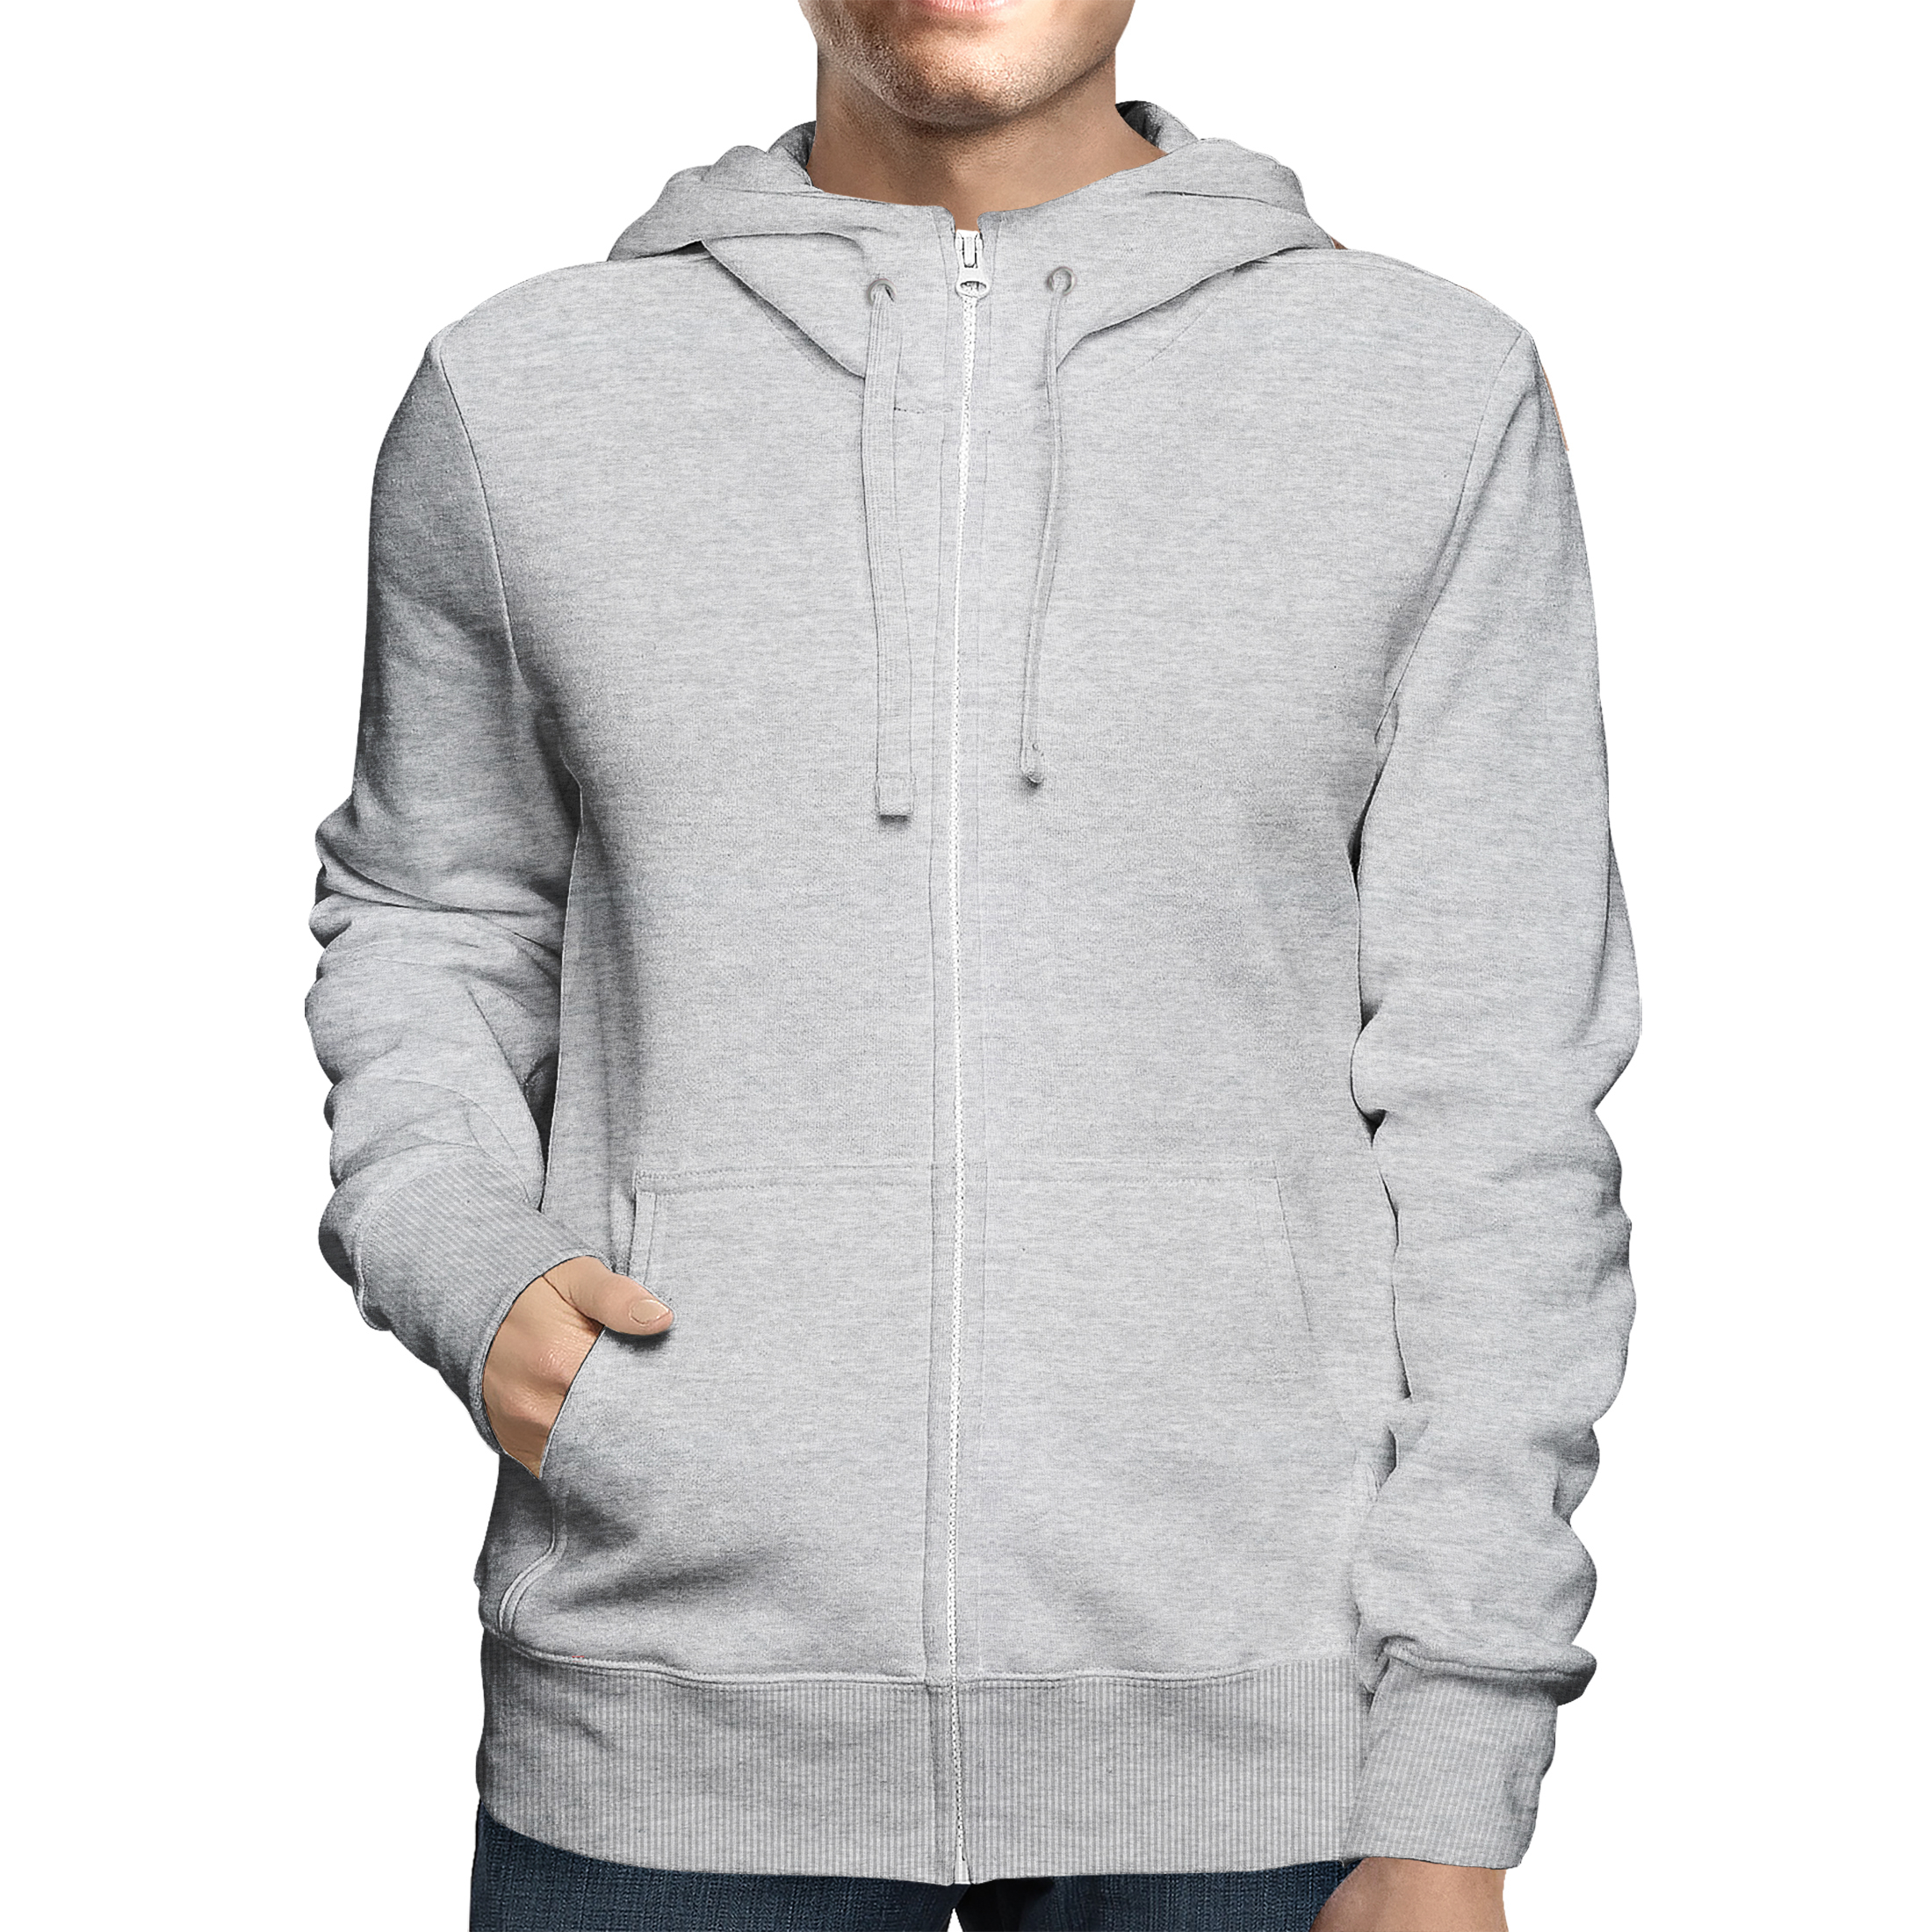 2-Pack: Men's Full Zip Up Fleece-Lined Hoodie Sweatshirt (Big & Tall Size Available) - Gray, X-large